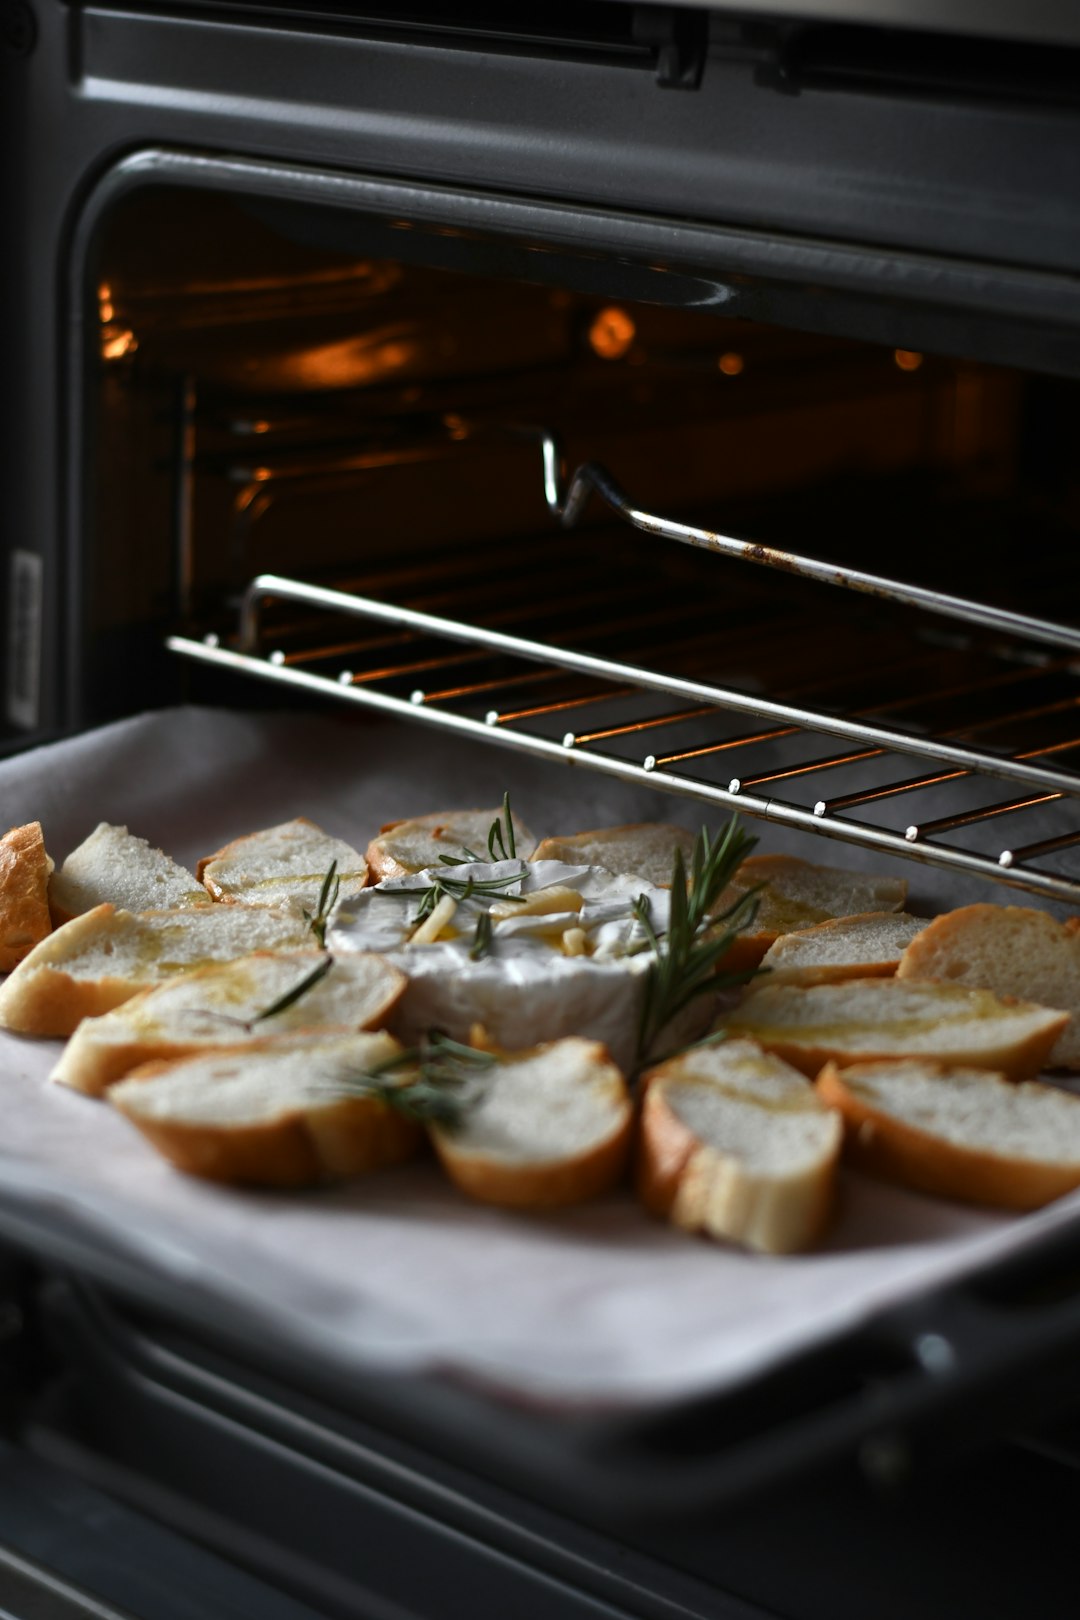 bread on stainless steel tray